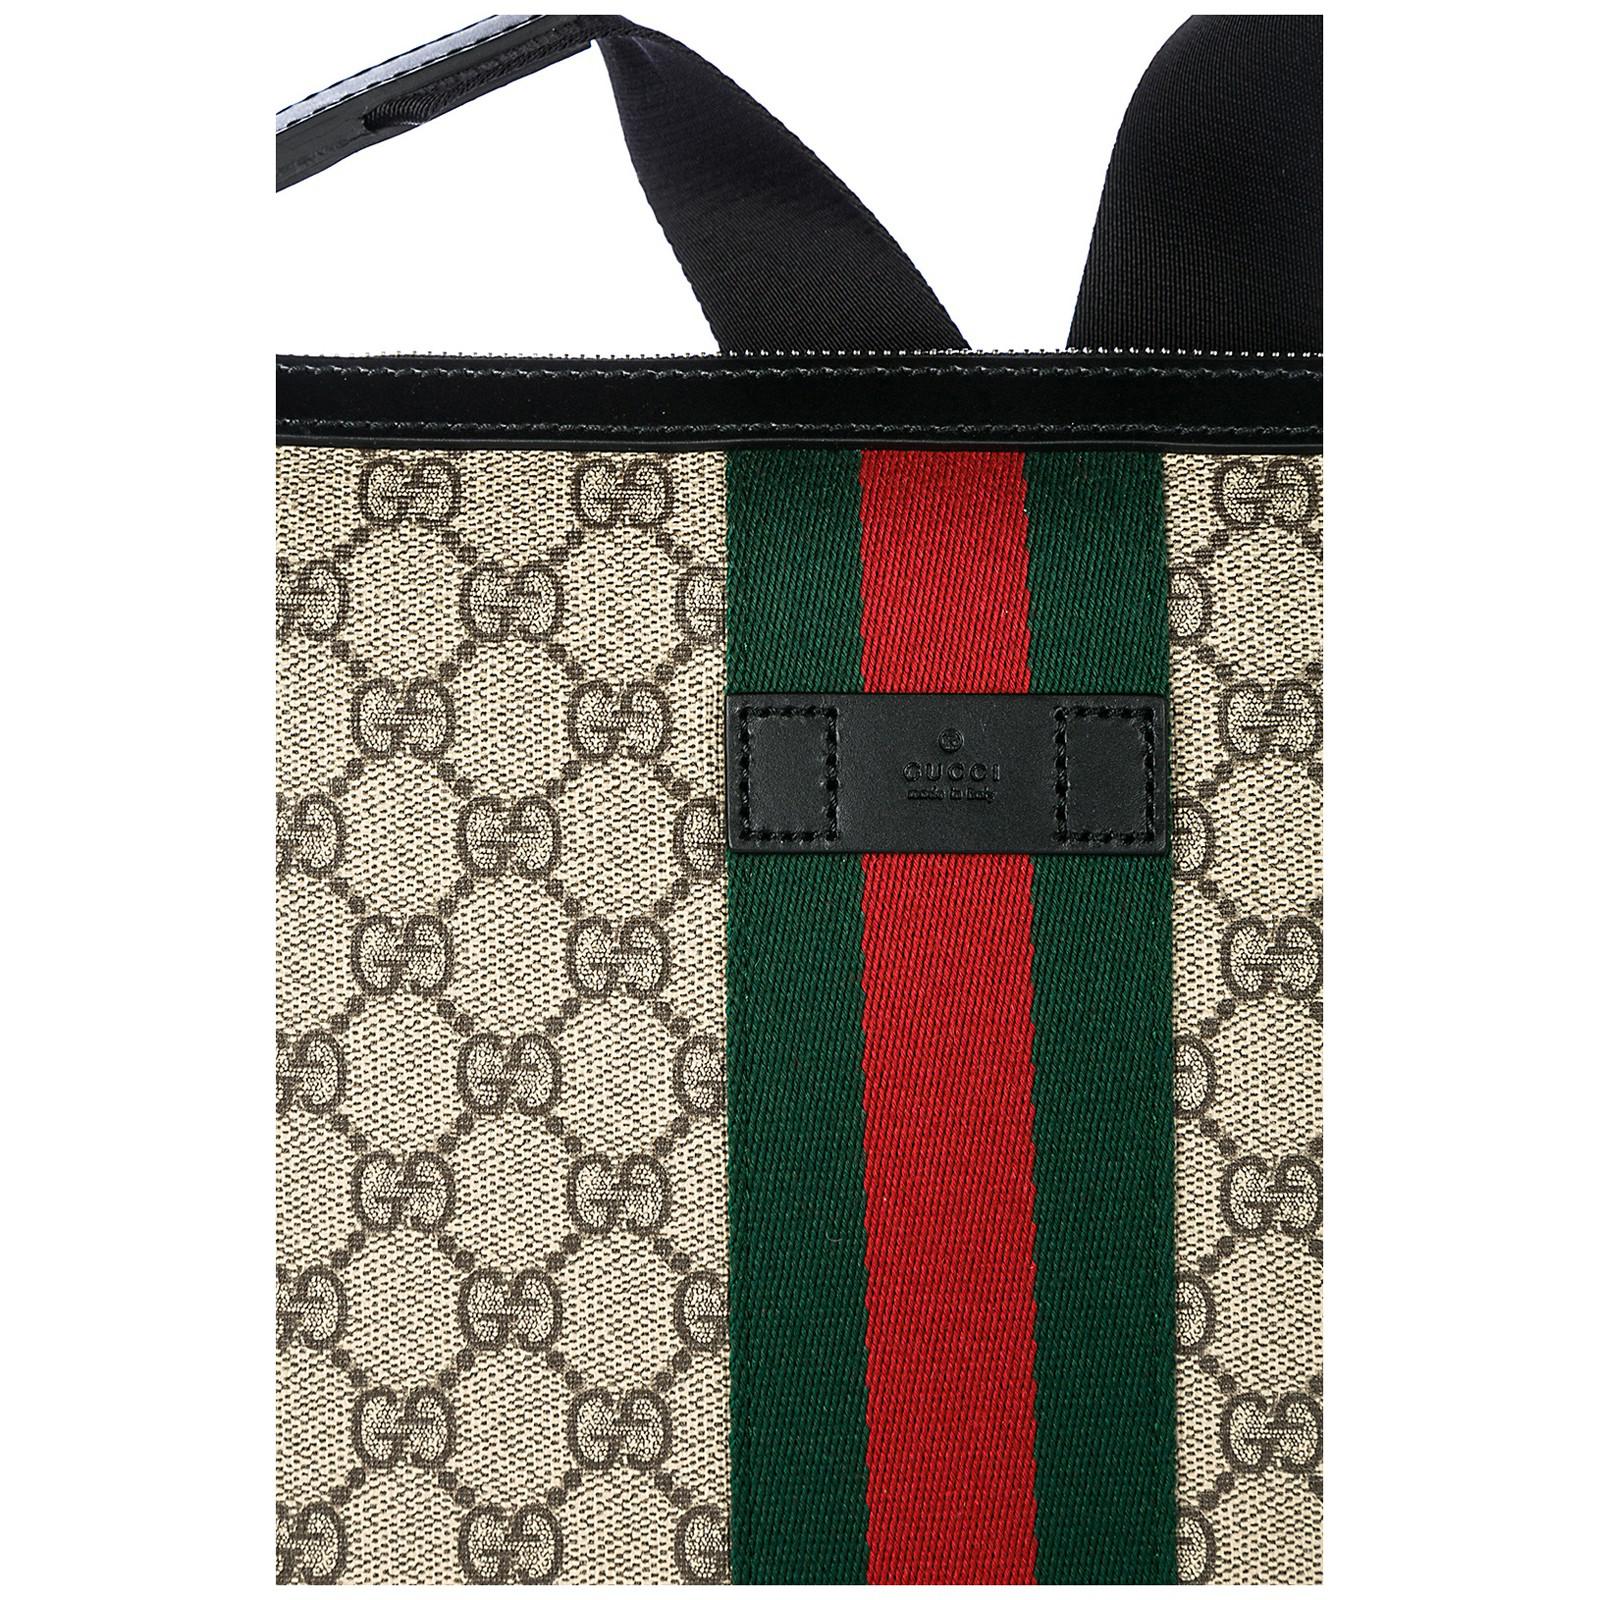 Gucci Red/Beige GG Canvas and Leather Flat Pouch Gucci